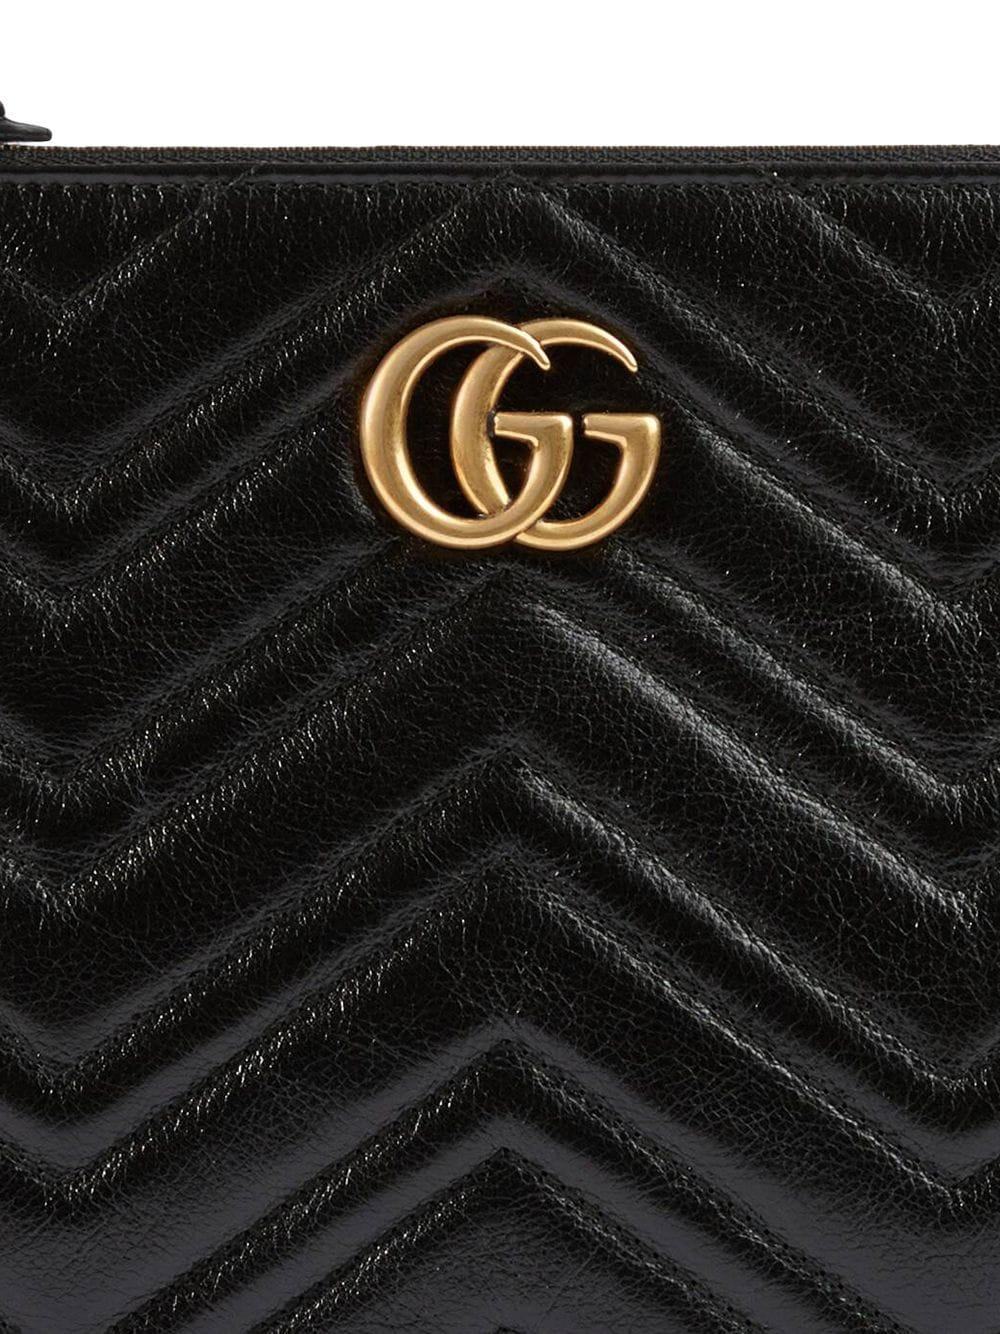 Gucci Leather GG Marmont Clutch Black - 22% - Lyst